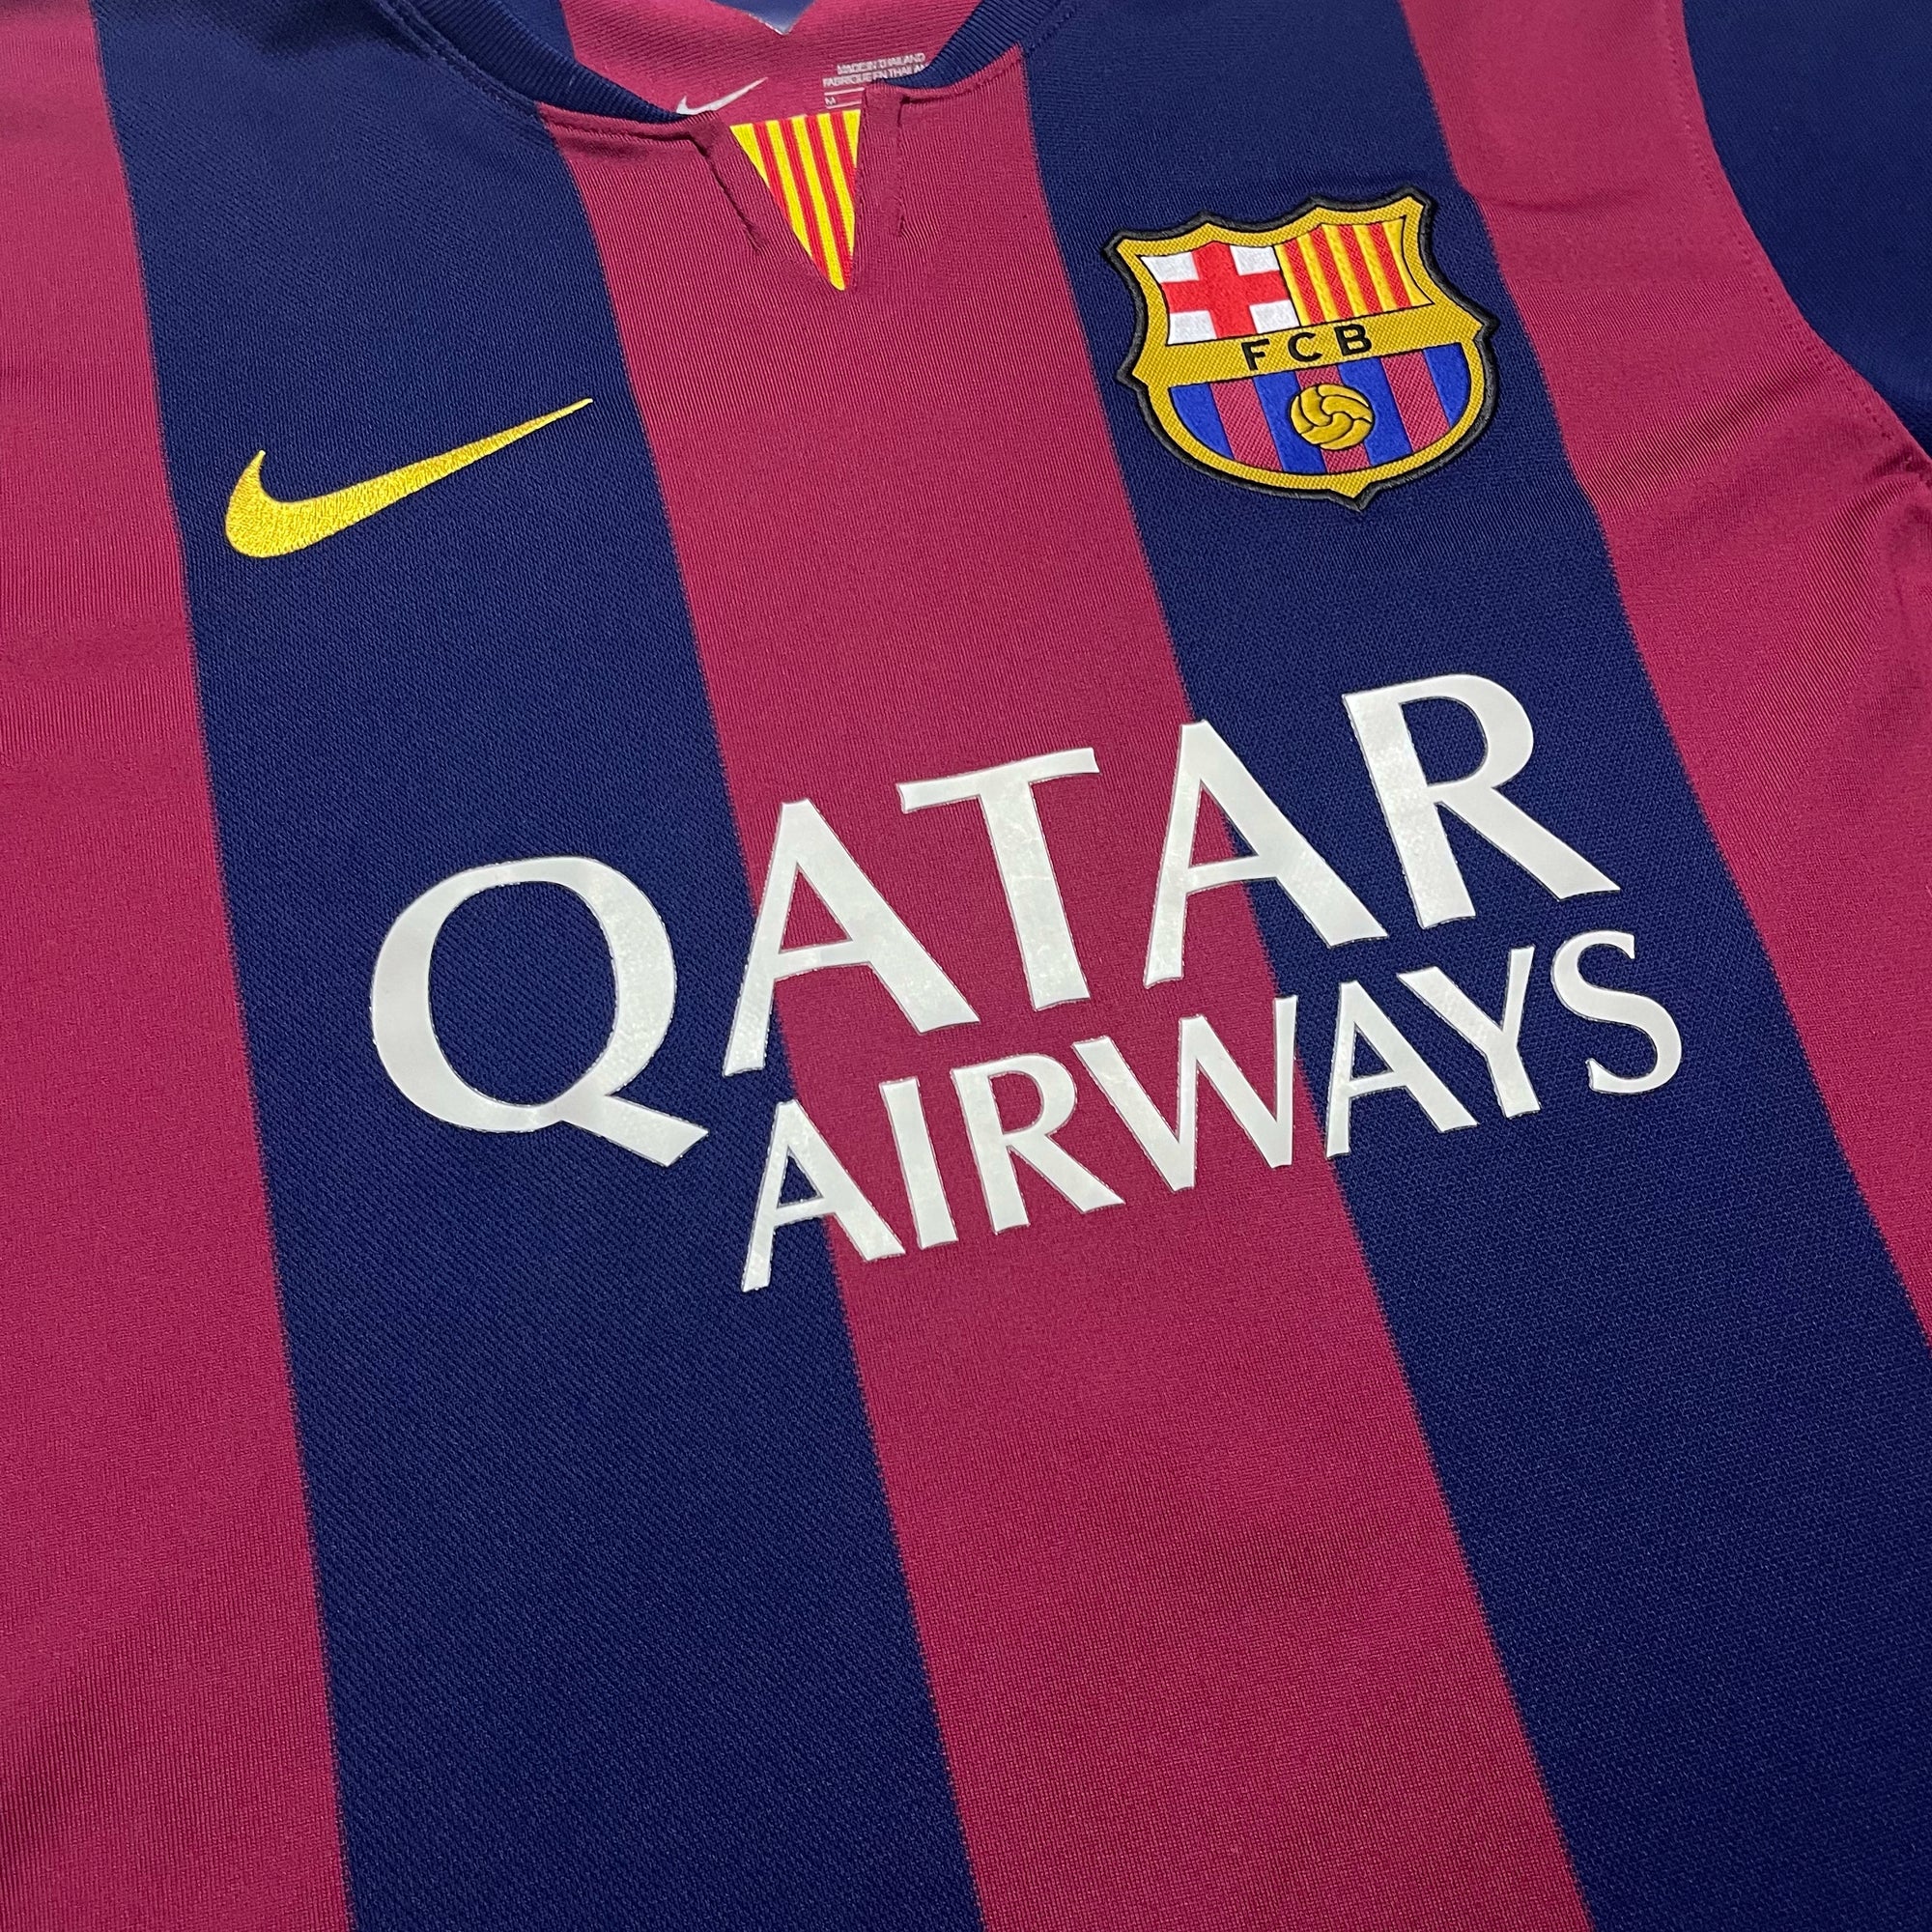 Maillot de foot Barcelone - Nike - Rouge